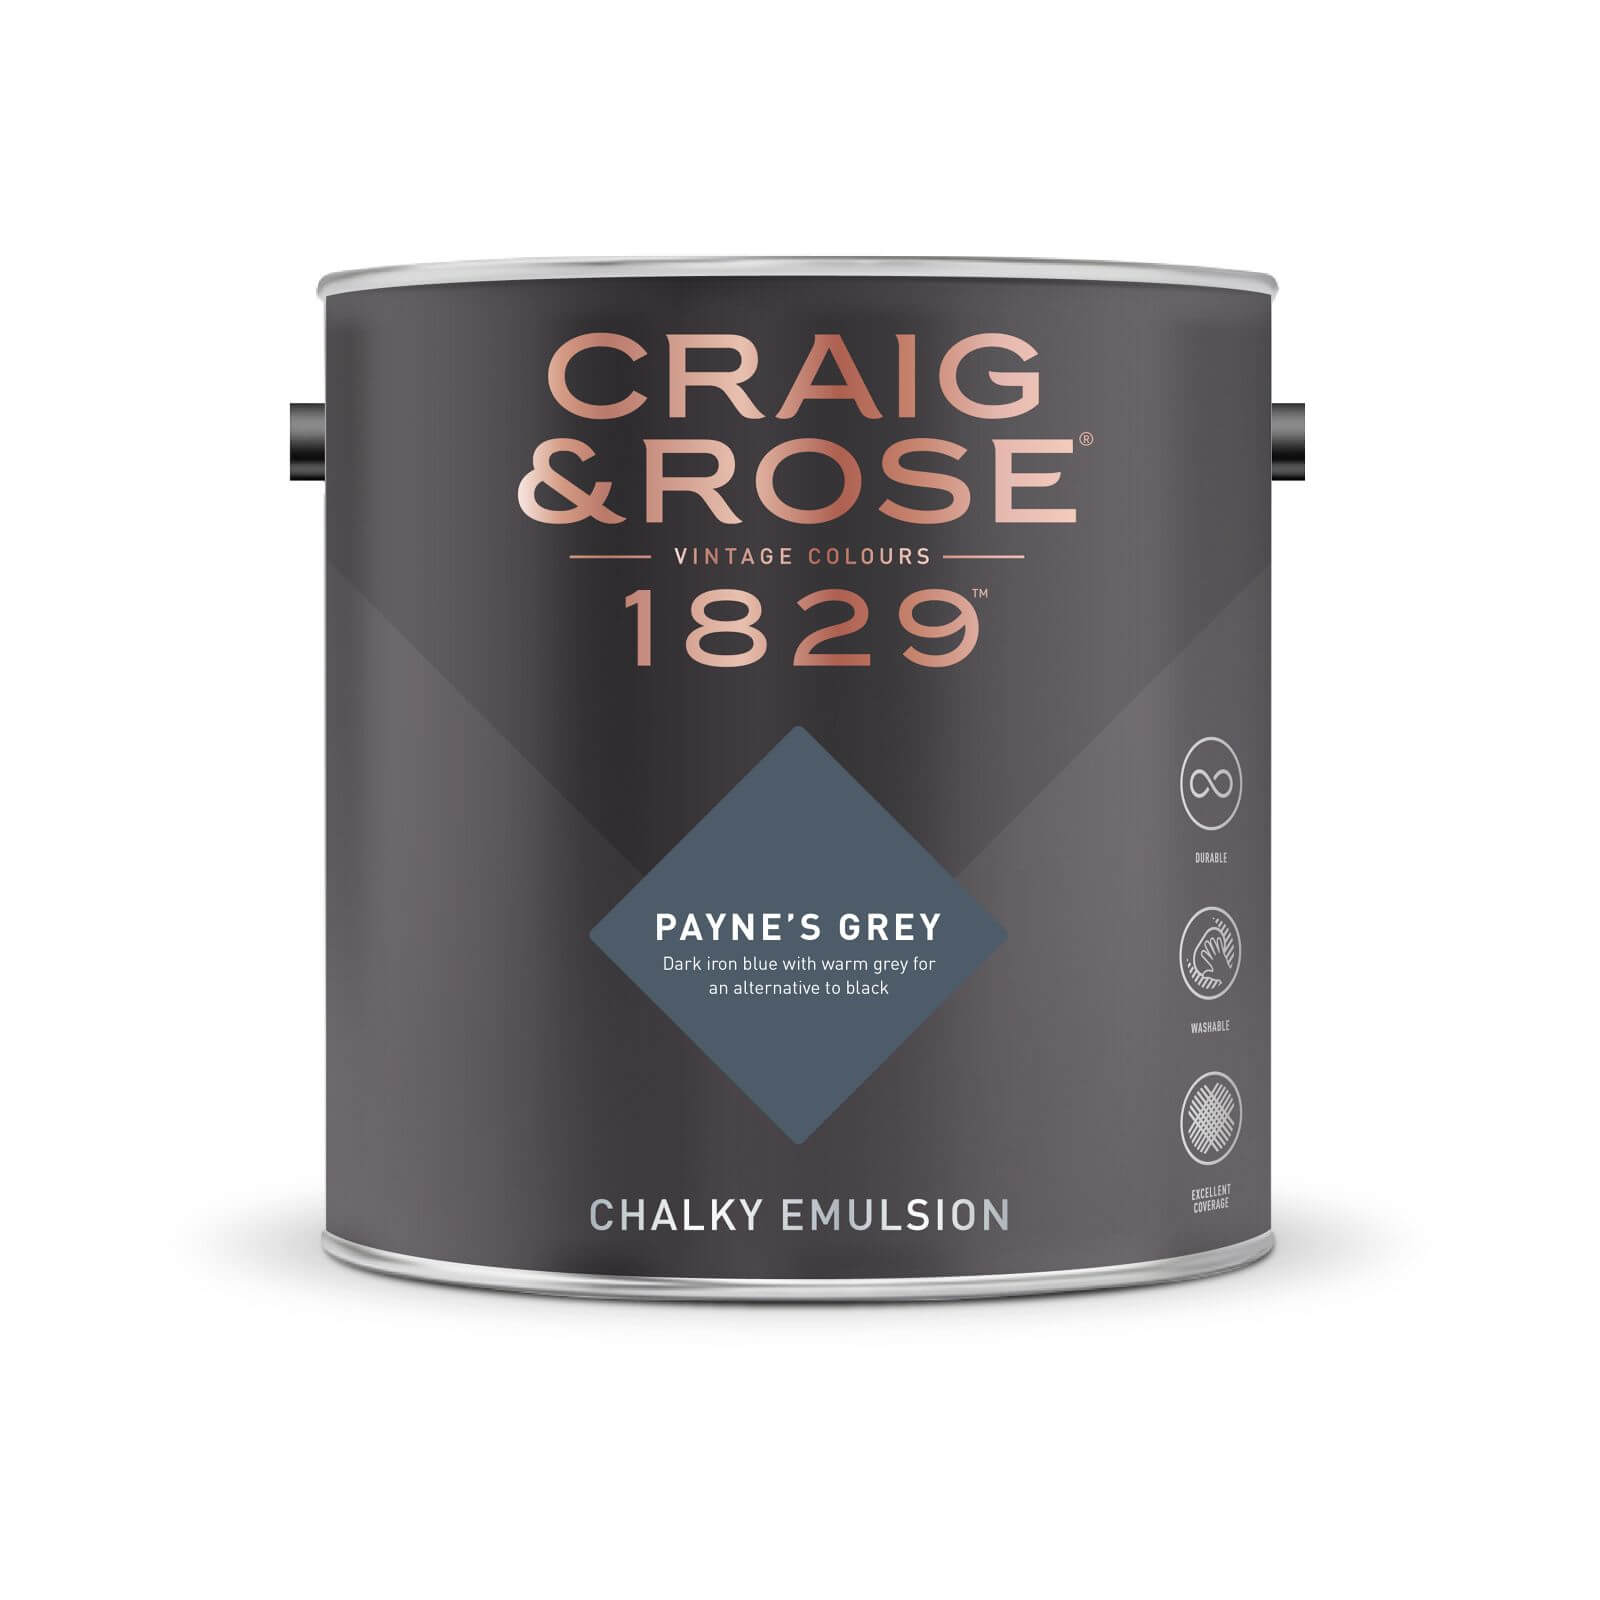 Craig & Rose 1829 Chalky Emulsion Paint Paynes Grey - Tester 50ml